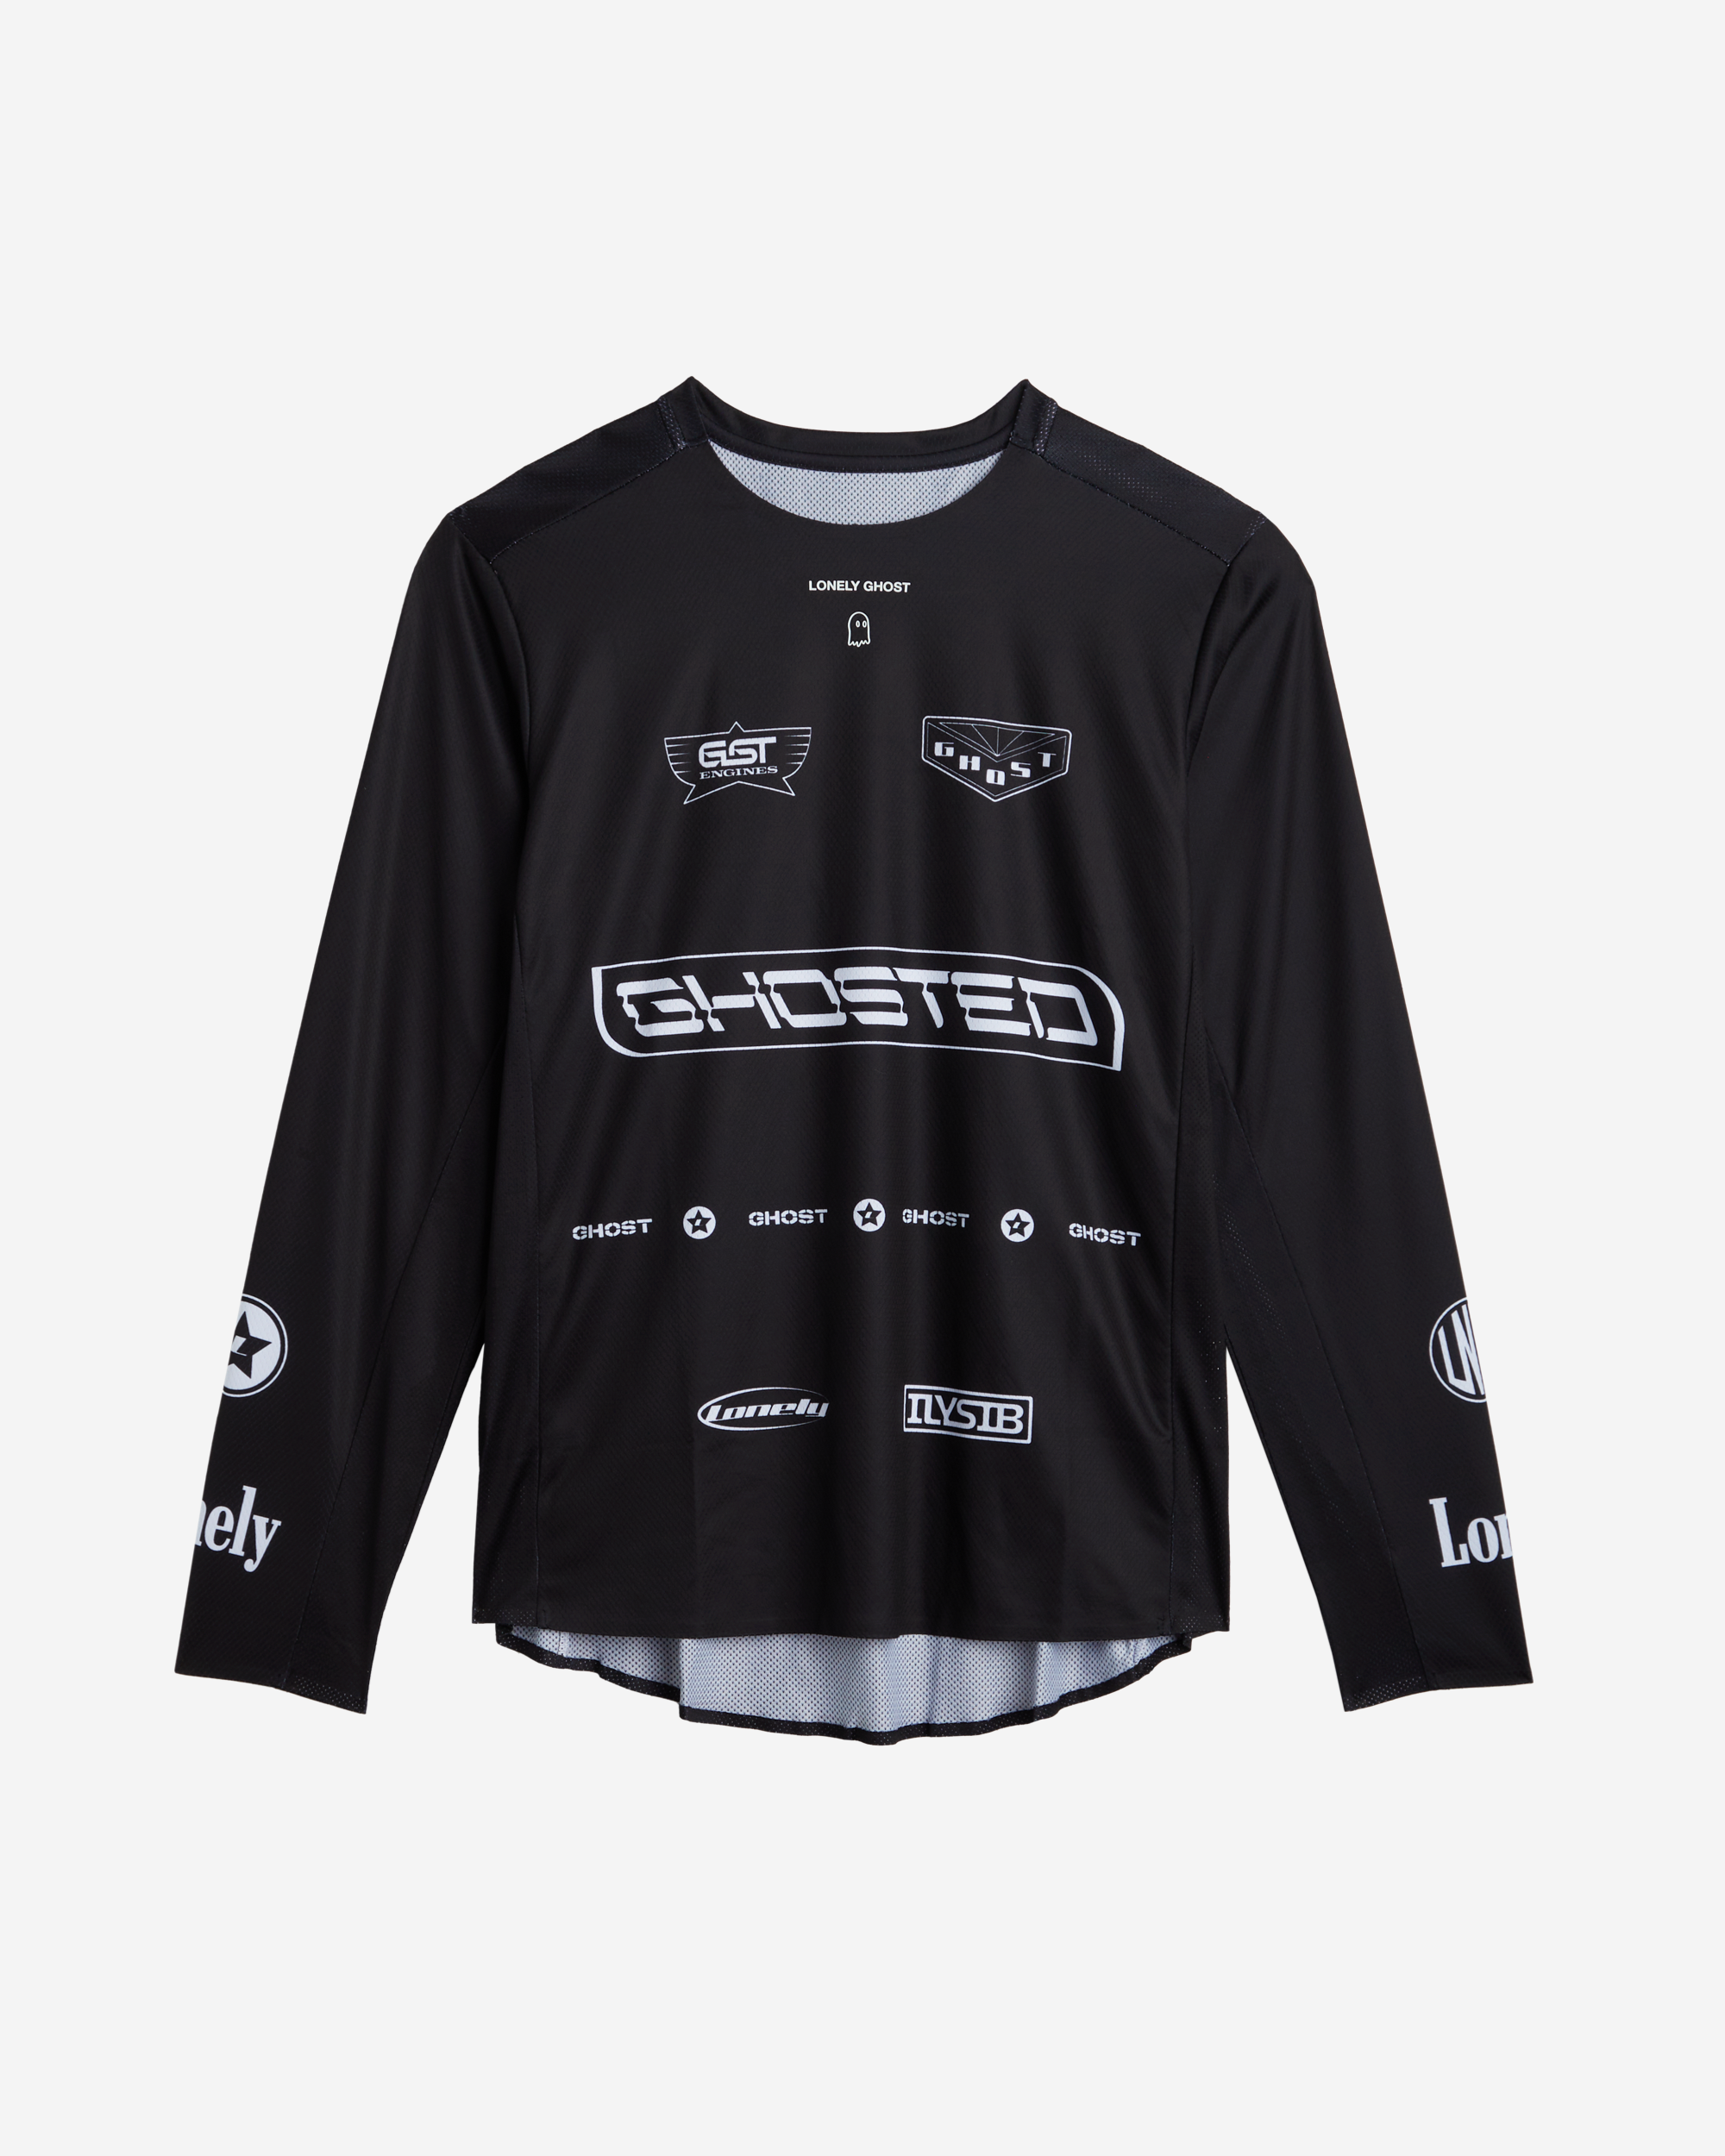 Lonely Road Moto Jersey